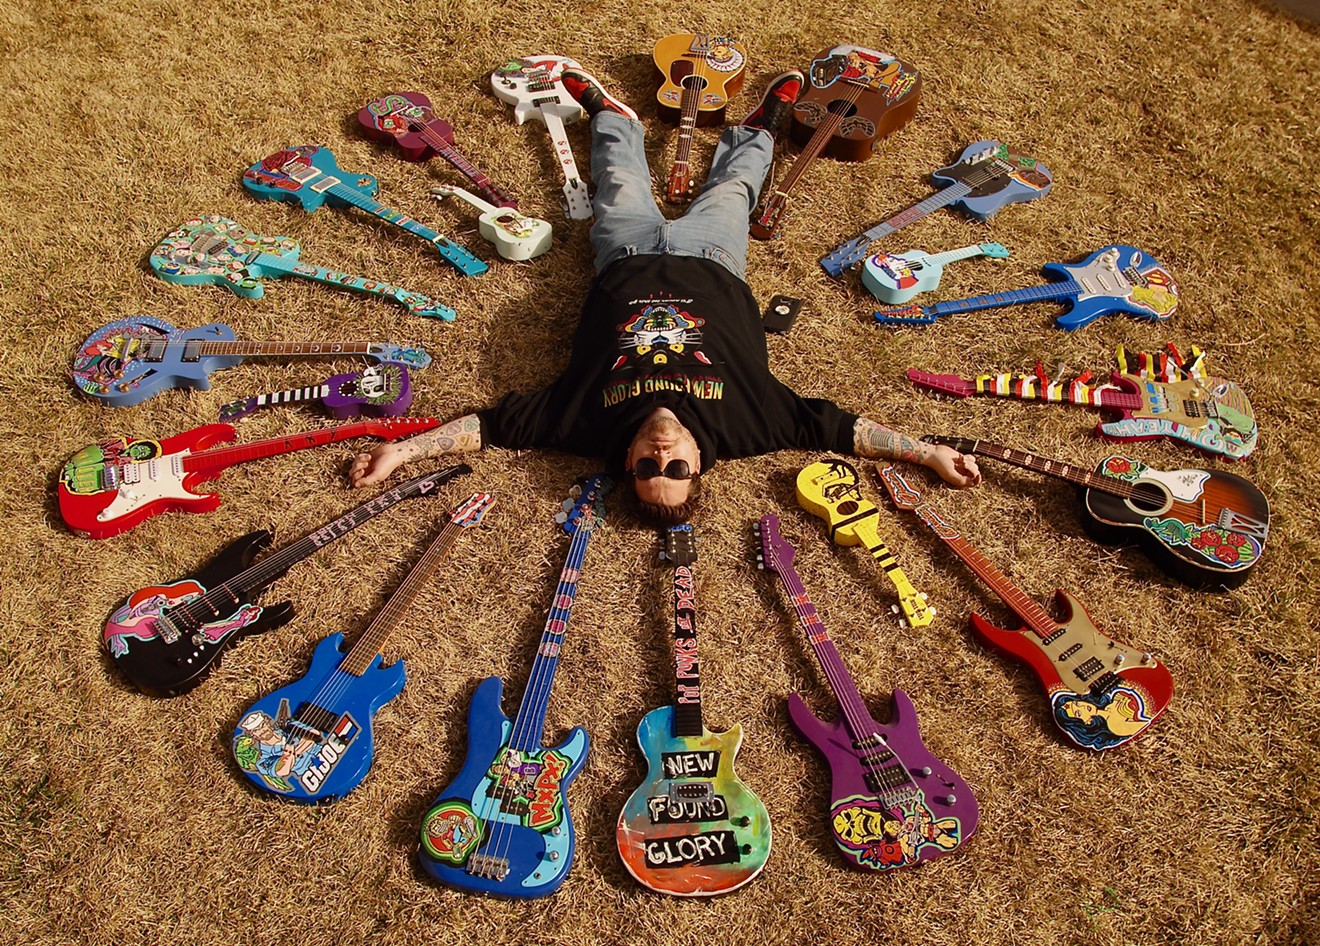 Musician and artist Patrick Wolfmeier has combined his love of painting and guitars into a successful and unusual business.